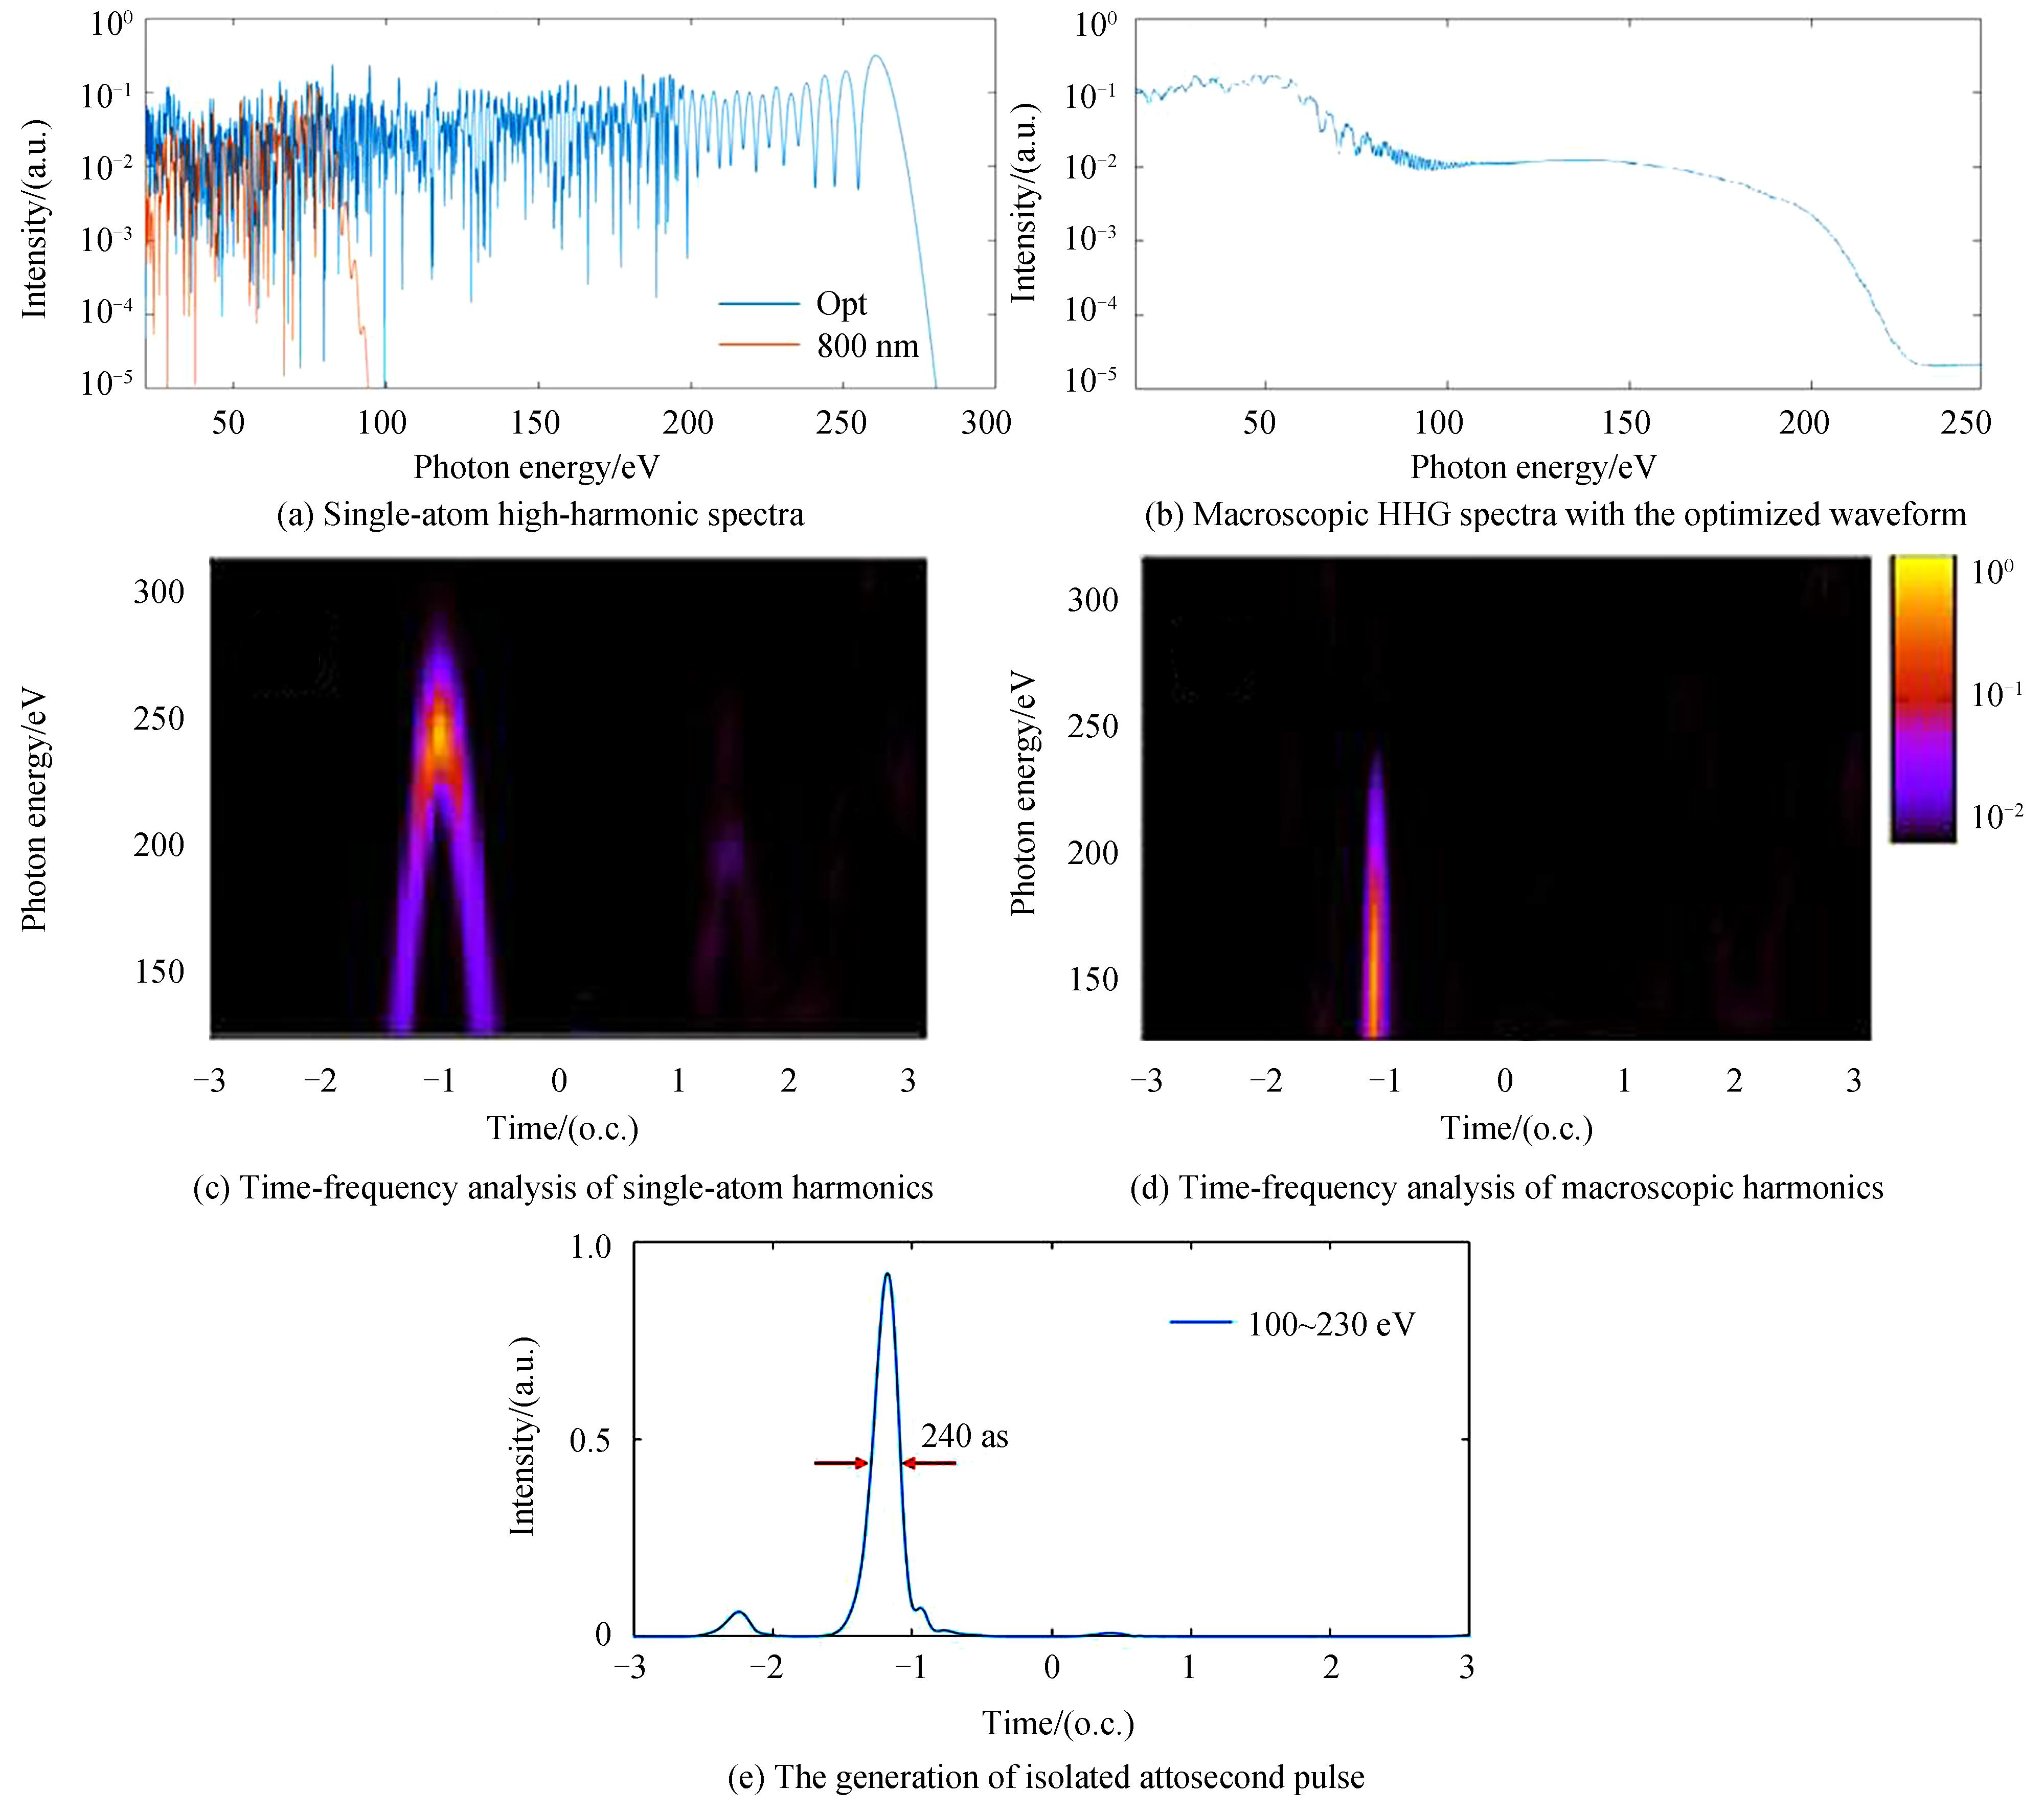 High-harmonic spectra and isolated attosecond pulses of a Ne atom under the two-color optimized waveform with duration of 16 fs